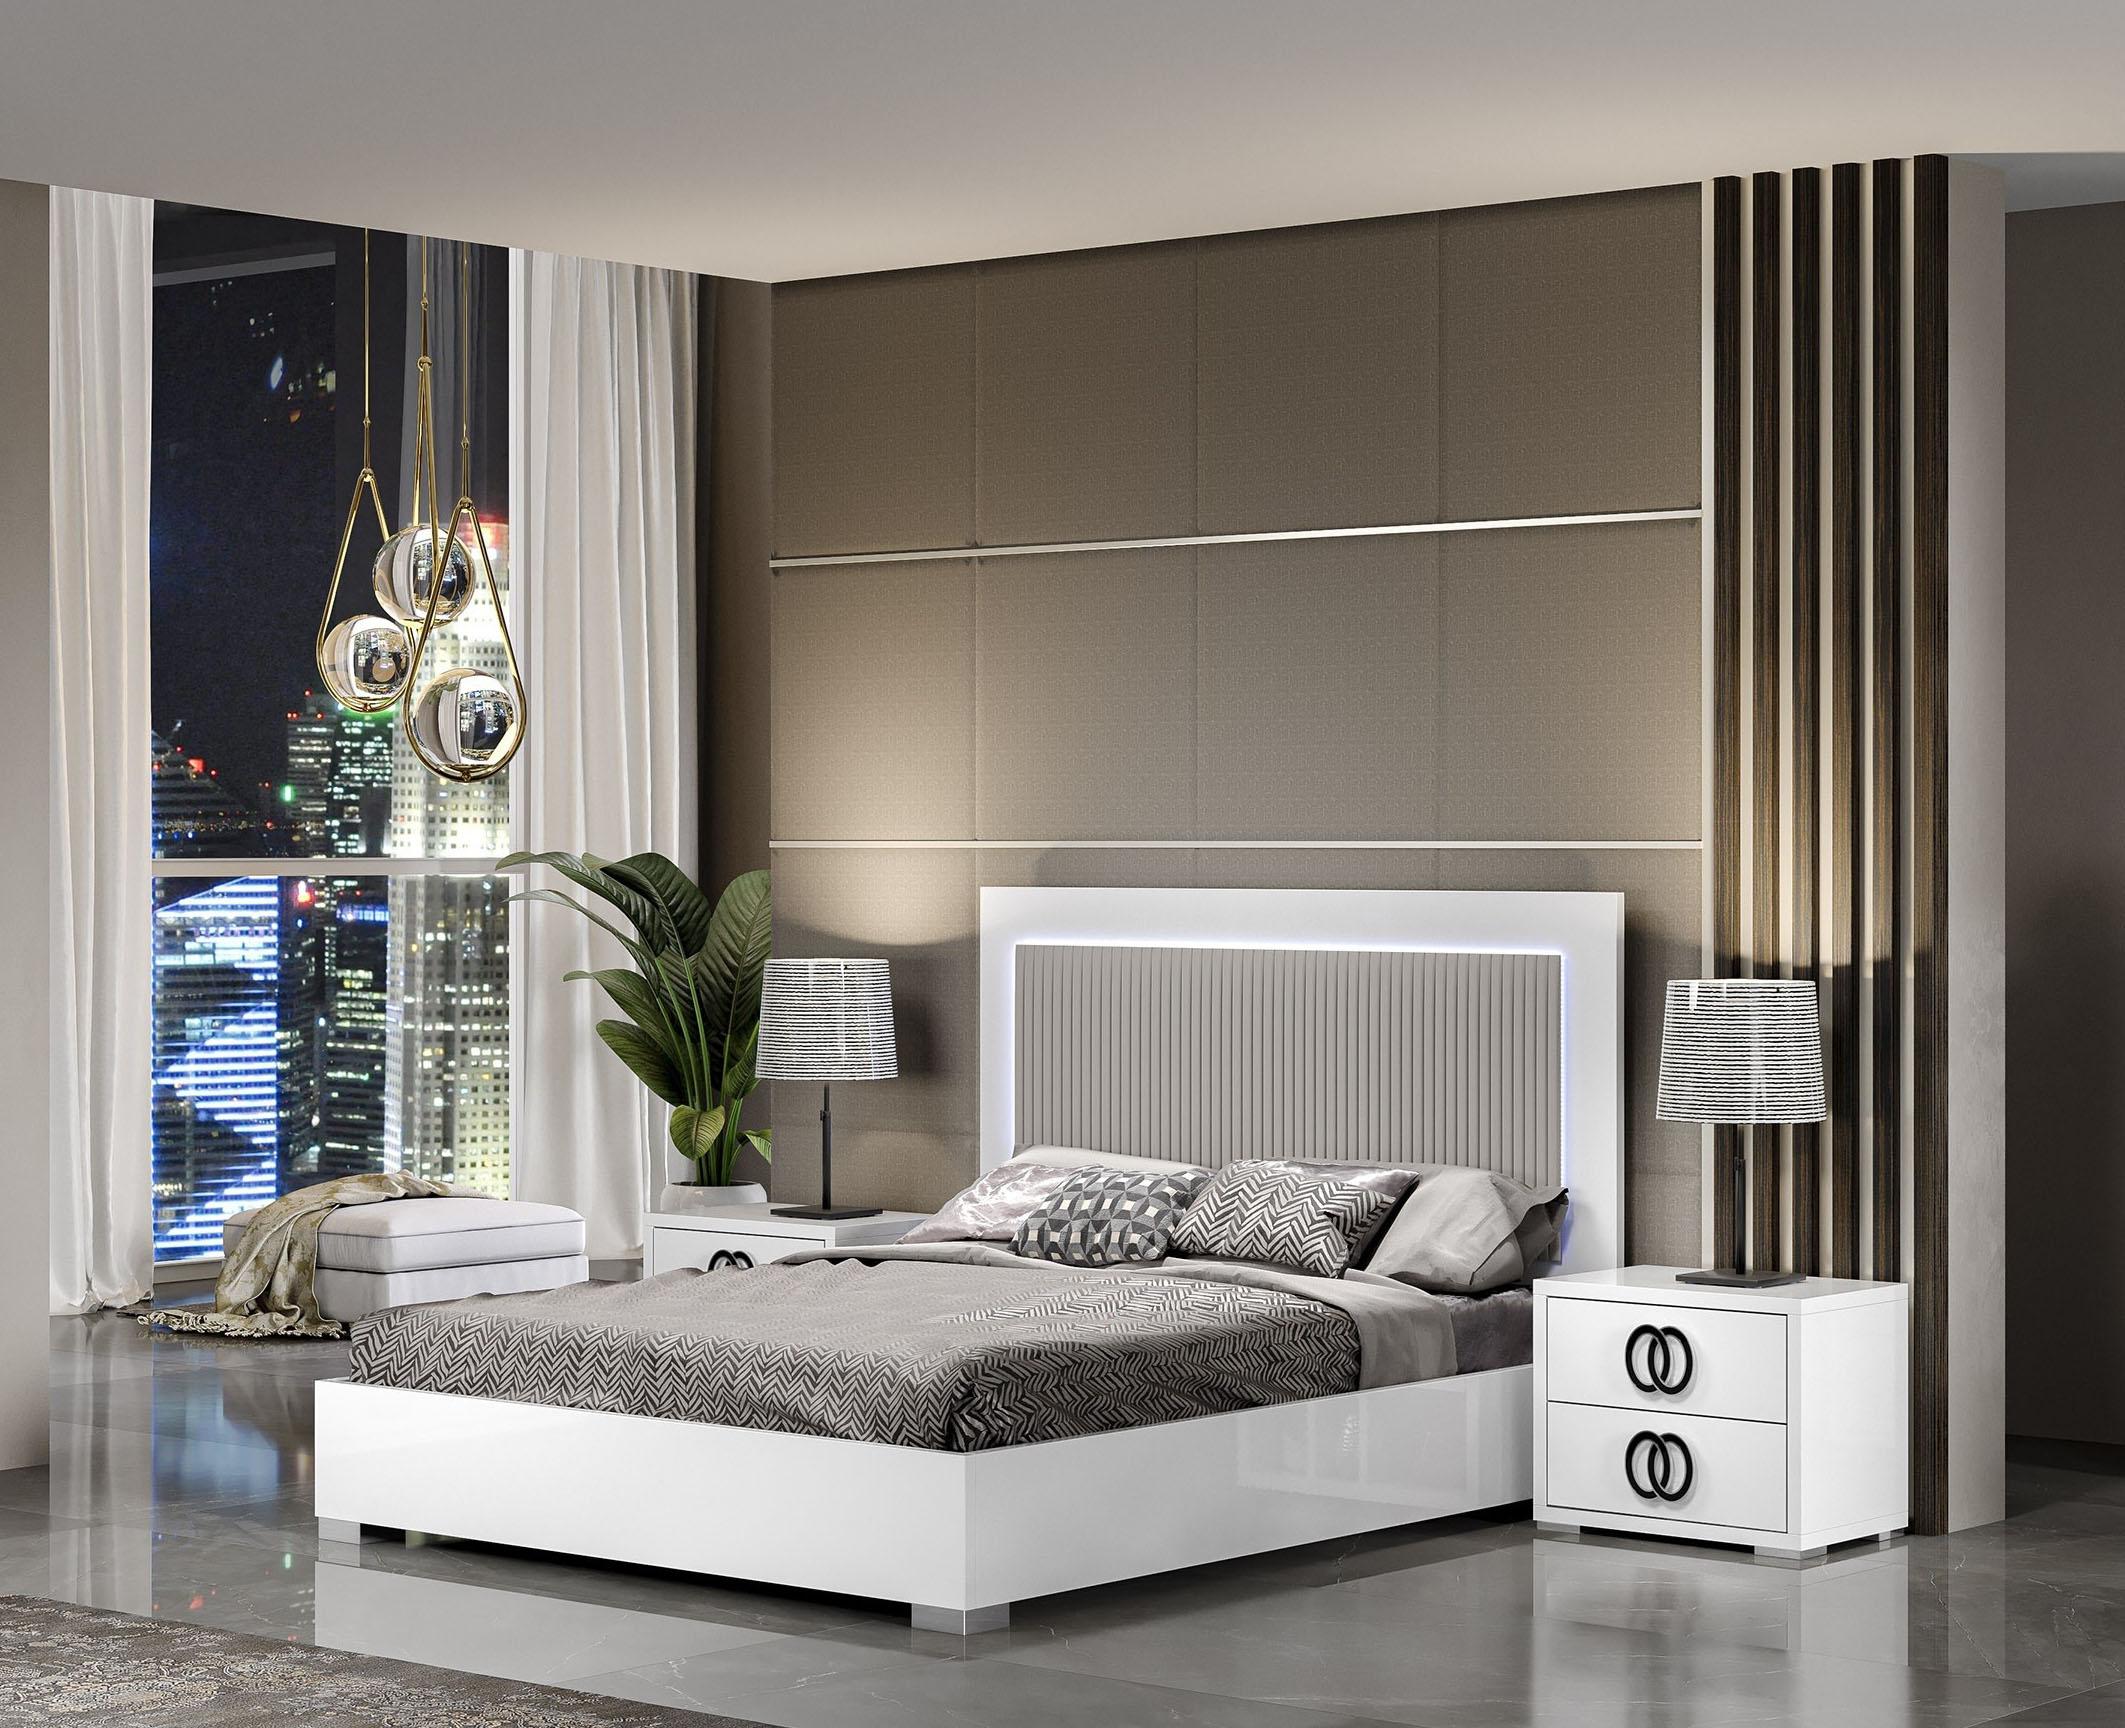 

    
Premium Queen Size Bedroom Set 3Pcs in White w/ LED light MADE IN ITALY J&M Luxuria
